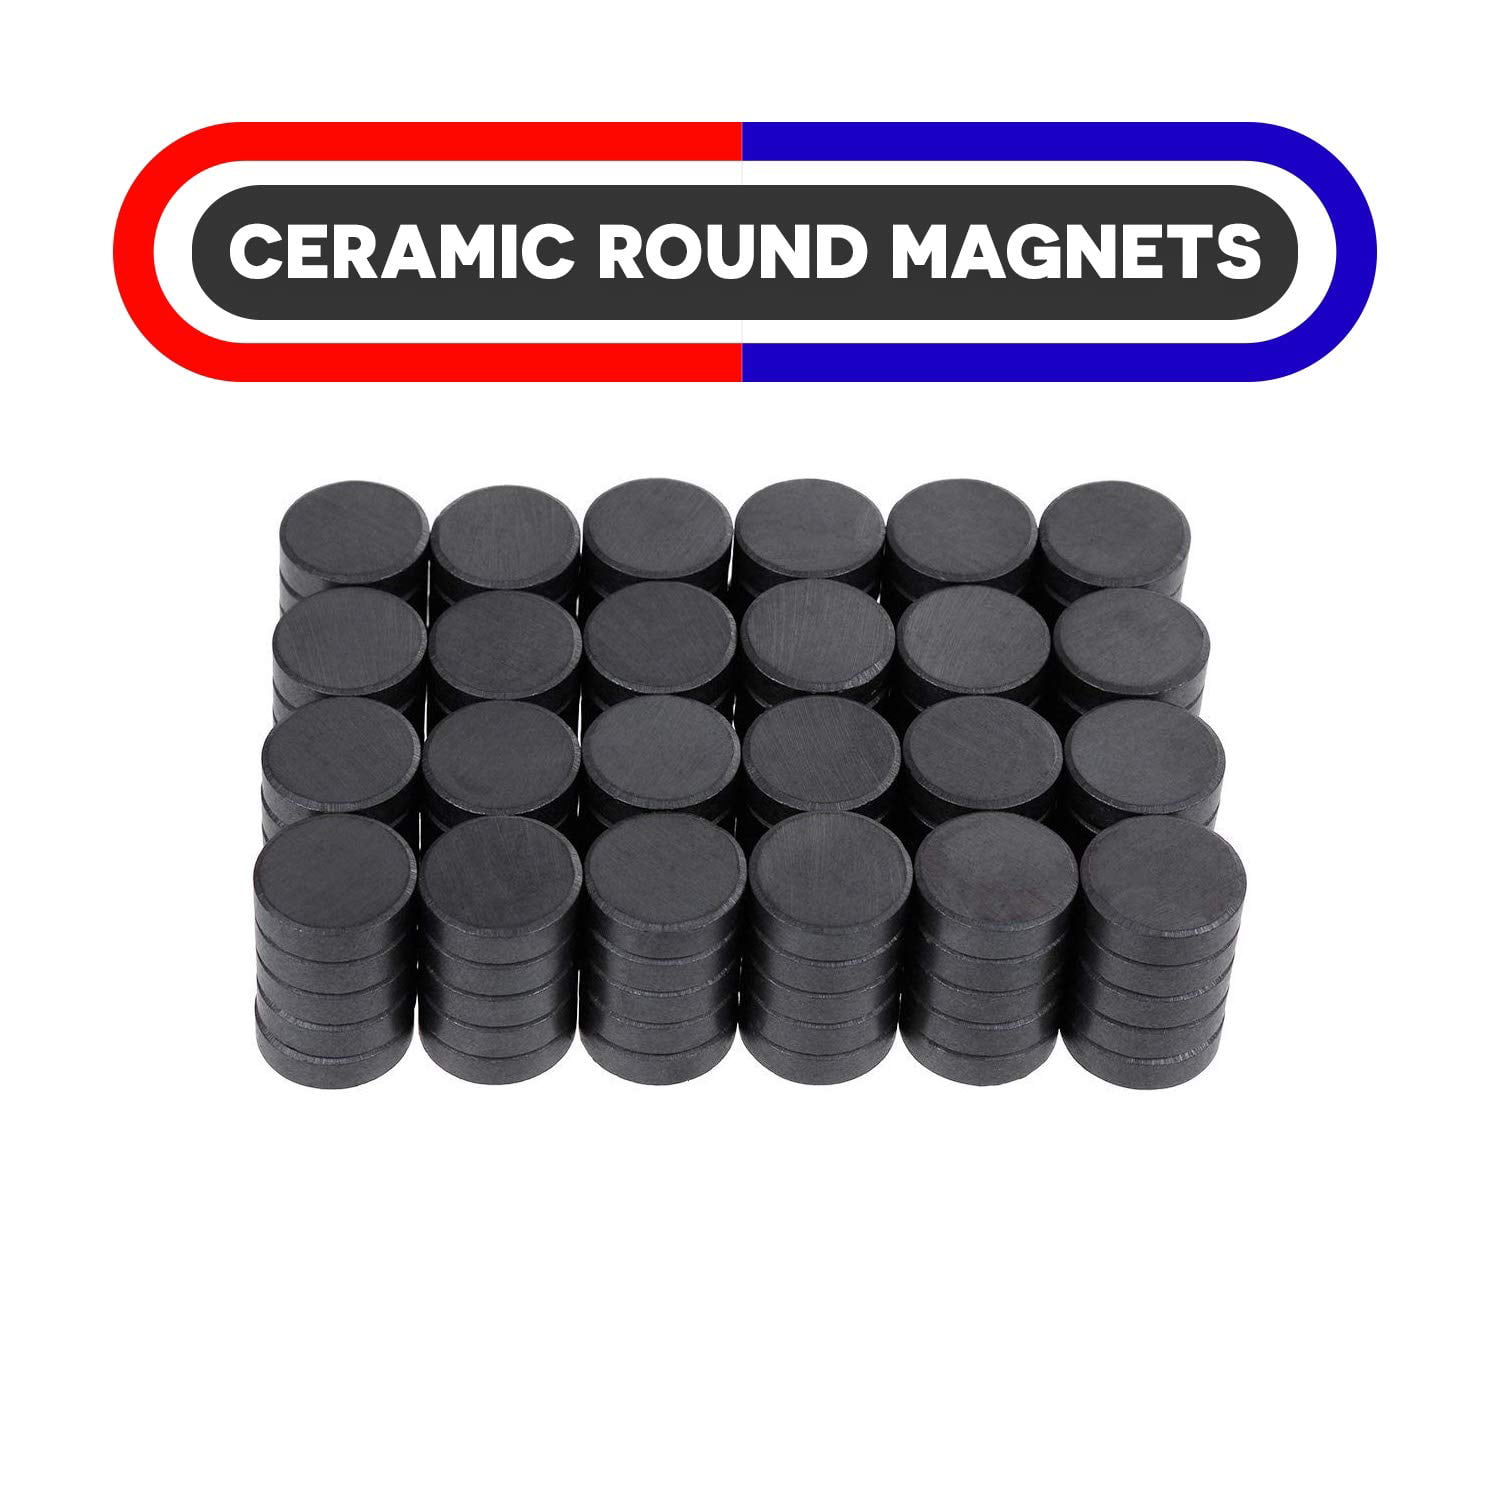 for Science Projects and Crafts... 100 Round Discs .7” x .2” Ceramic Magnets 